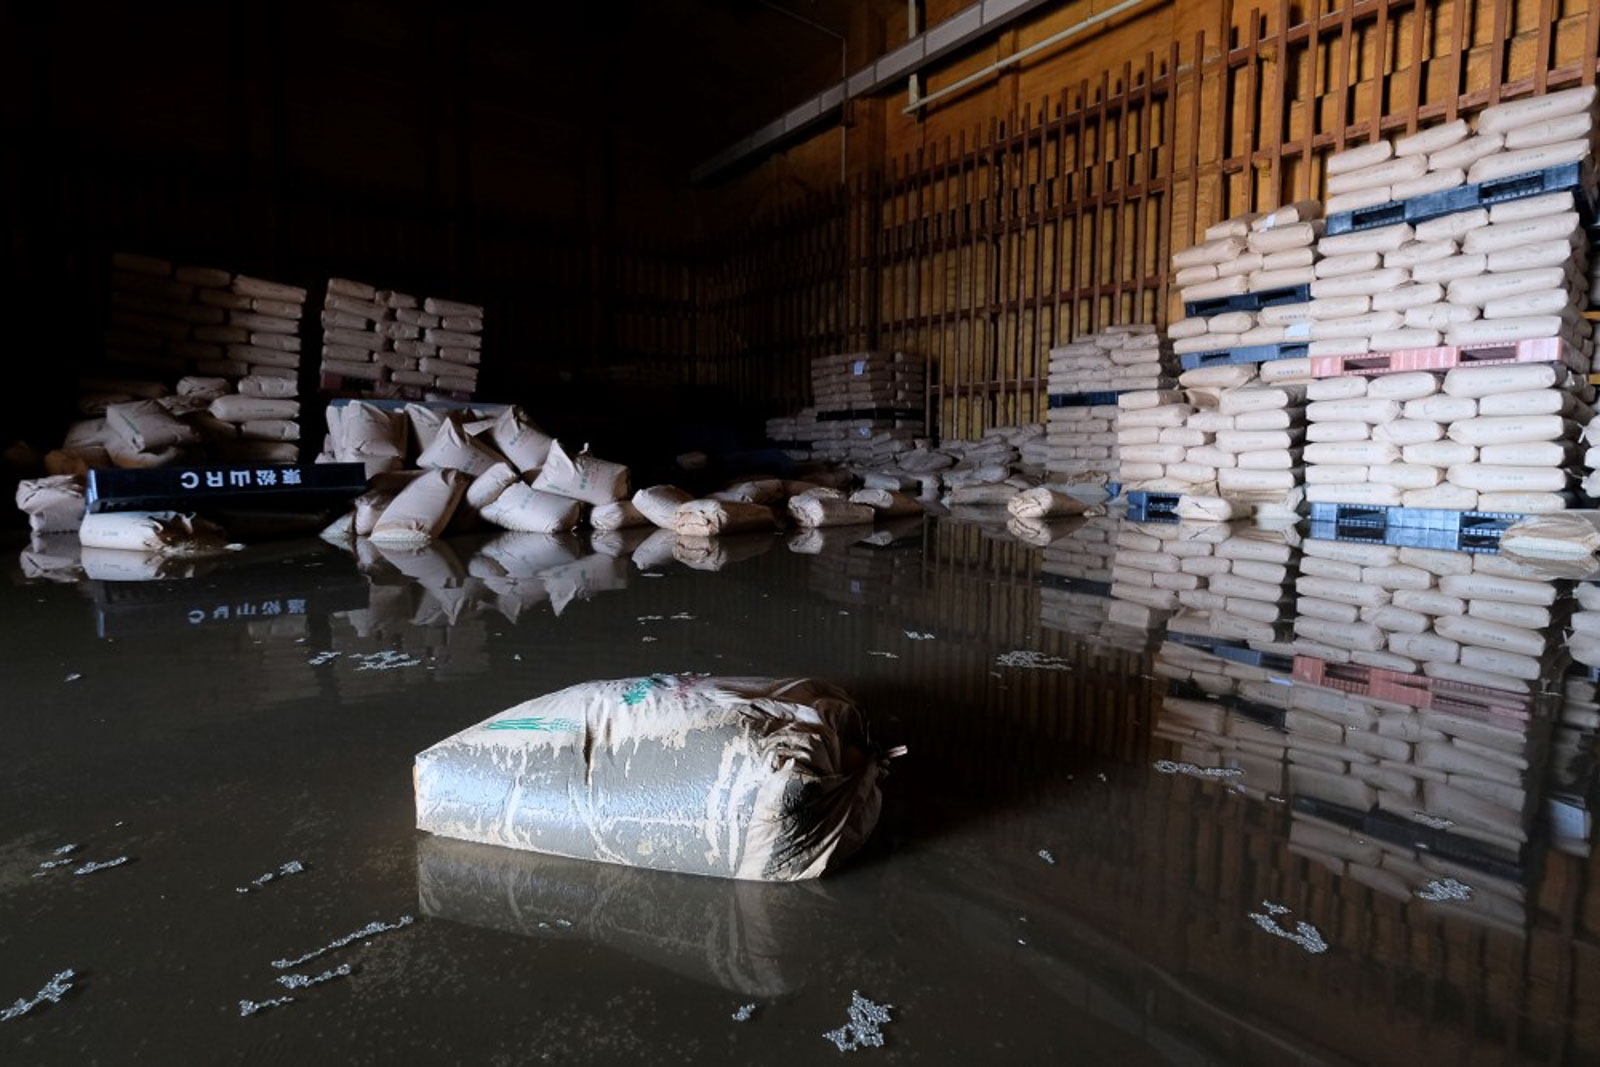 Sacks of rice saturated with floodwaters are seen in a warehouse in the aftermath of Typhoon Hagibis in Higashi-Matsuyama, Saitama prefecture on October 13, 2019.  Photo by Kazuhiro Nogi/AFP 